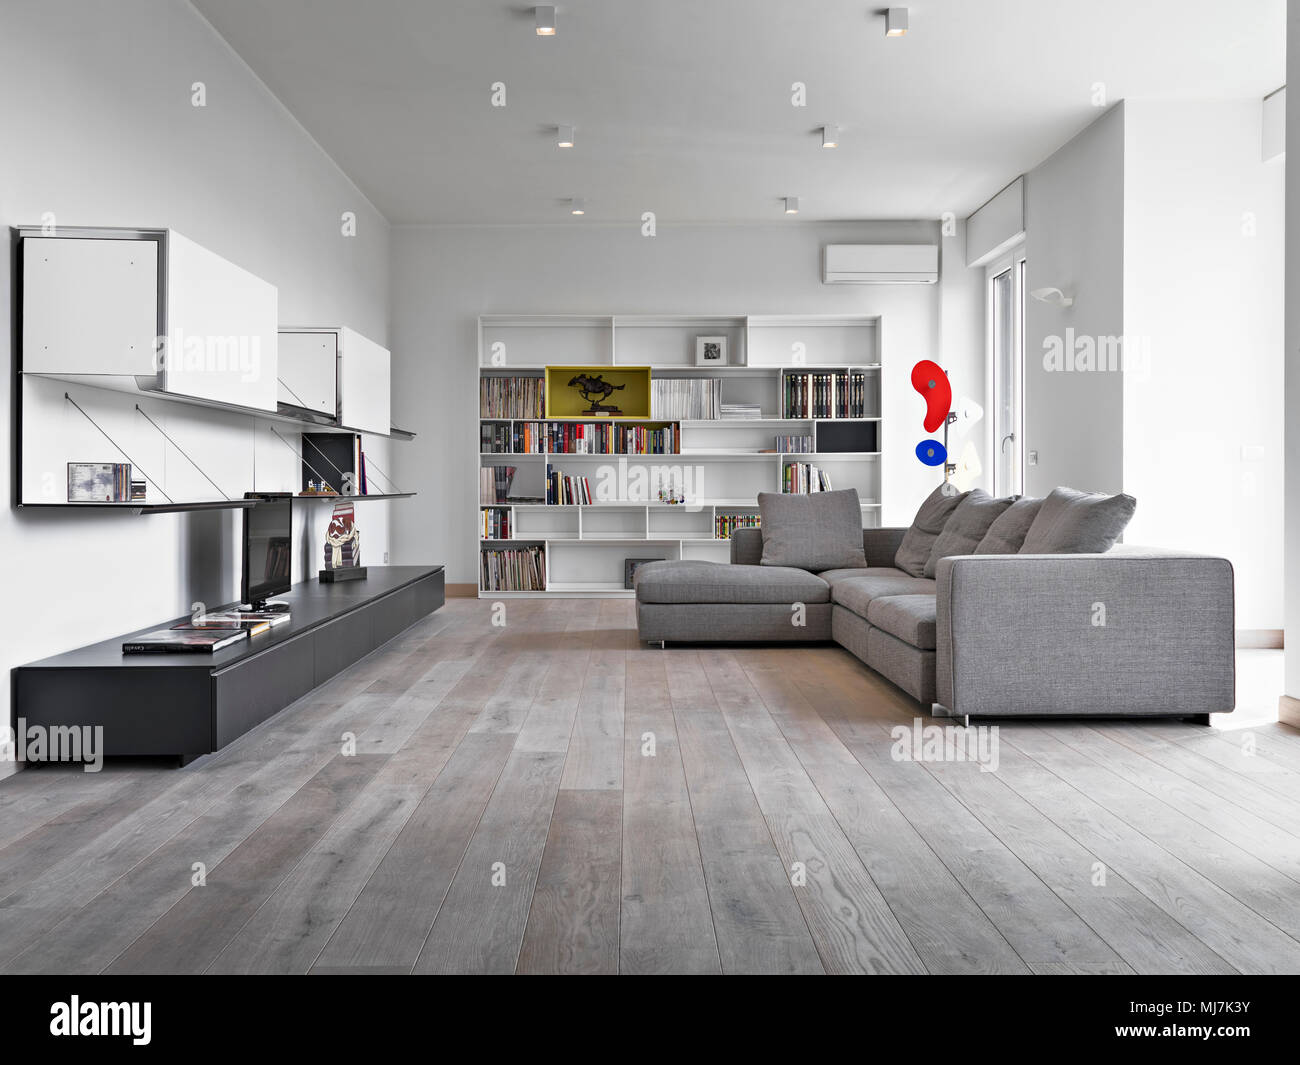 interiors shots of a modern living room with gray fabric sofa and wooden floor Stock Photo